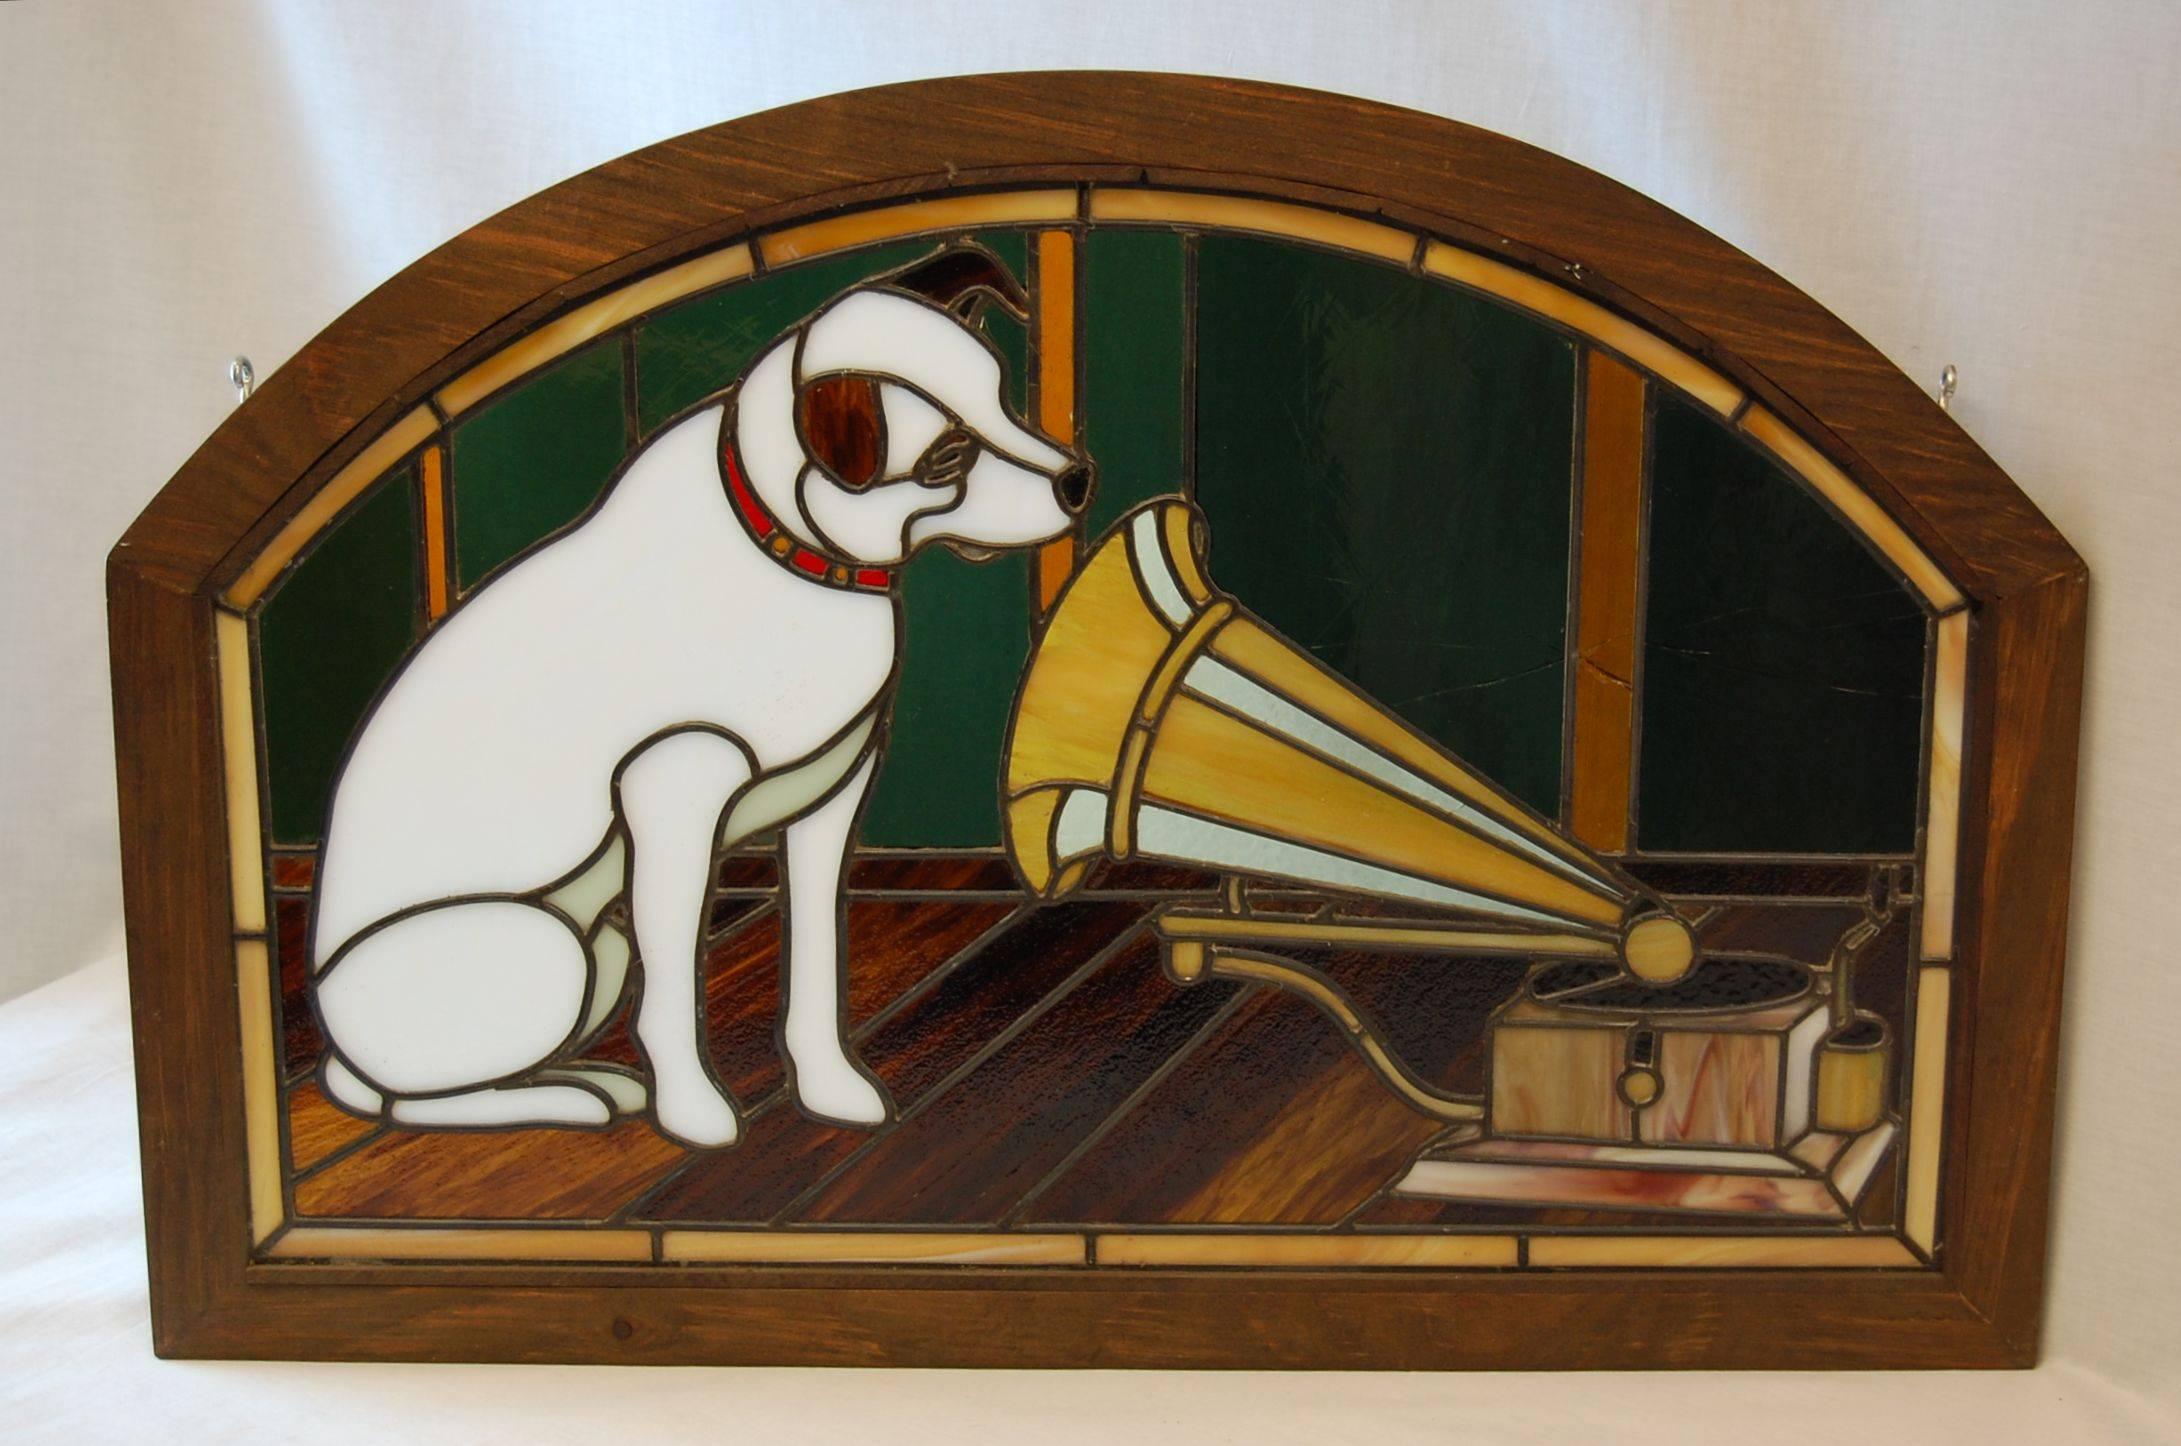 This image of Nipper became the trademark for RCA in 1929, this framed stained glass panel was probably made in the early 20th century.